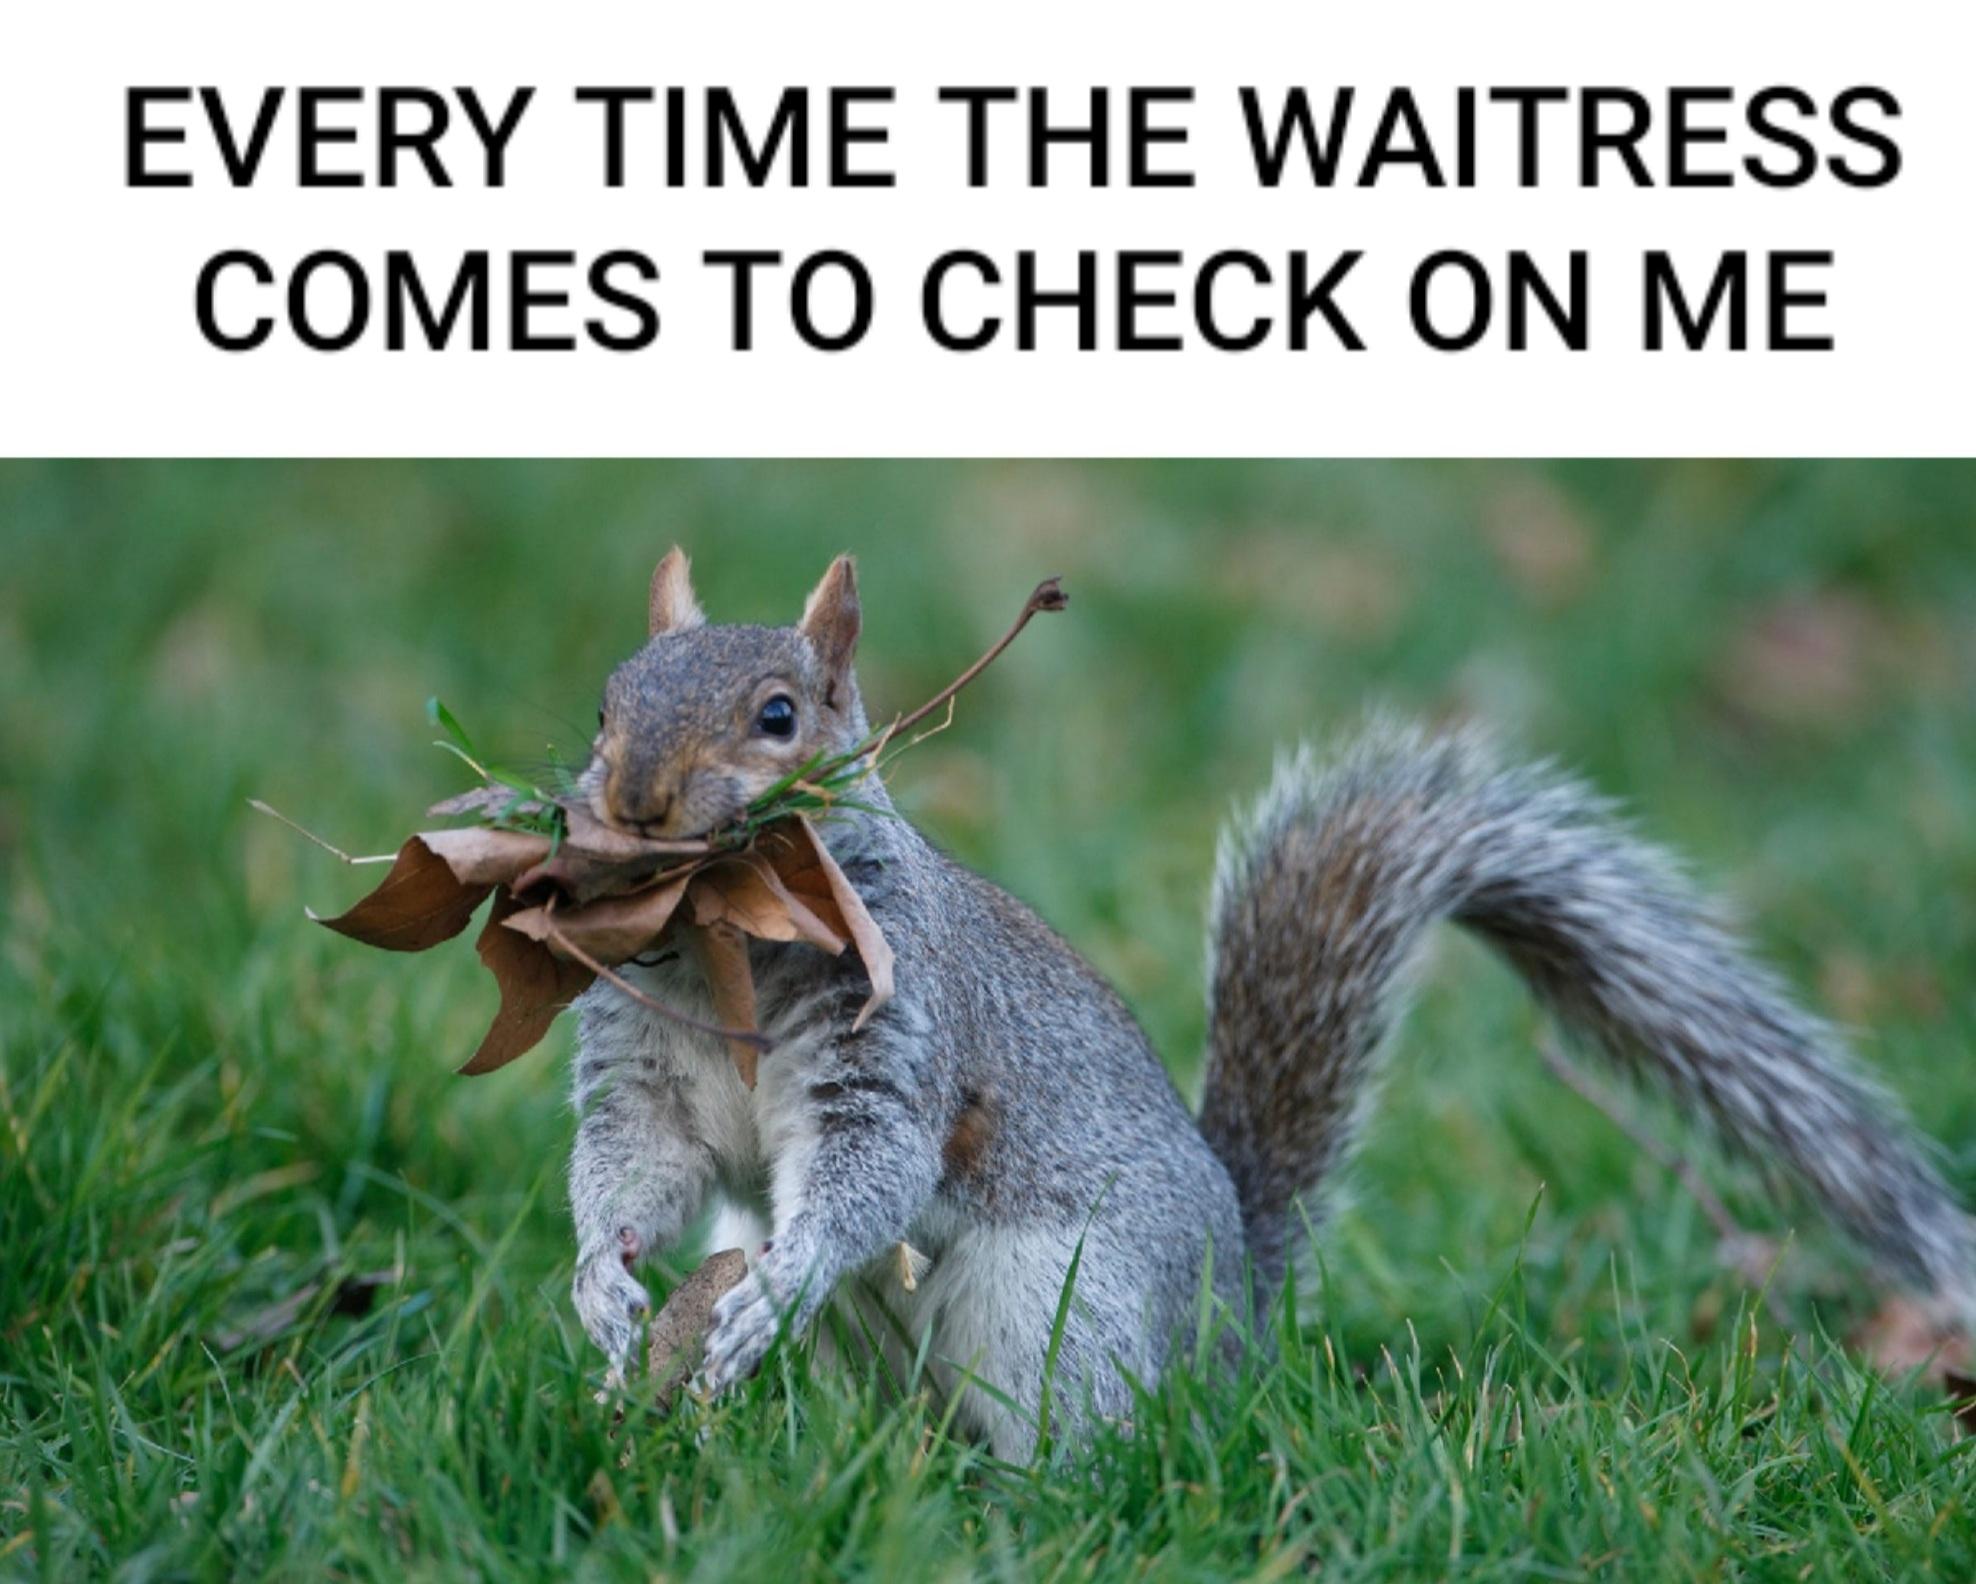 Fresh Pics And Memes - Squirrels - Every Time The Waitress Comes To Check On Me